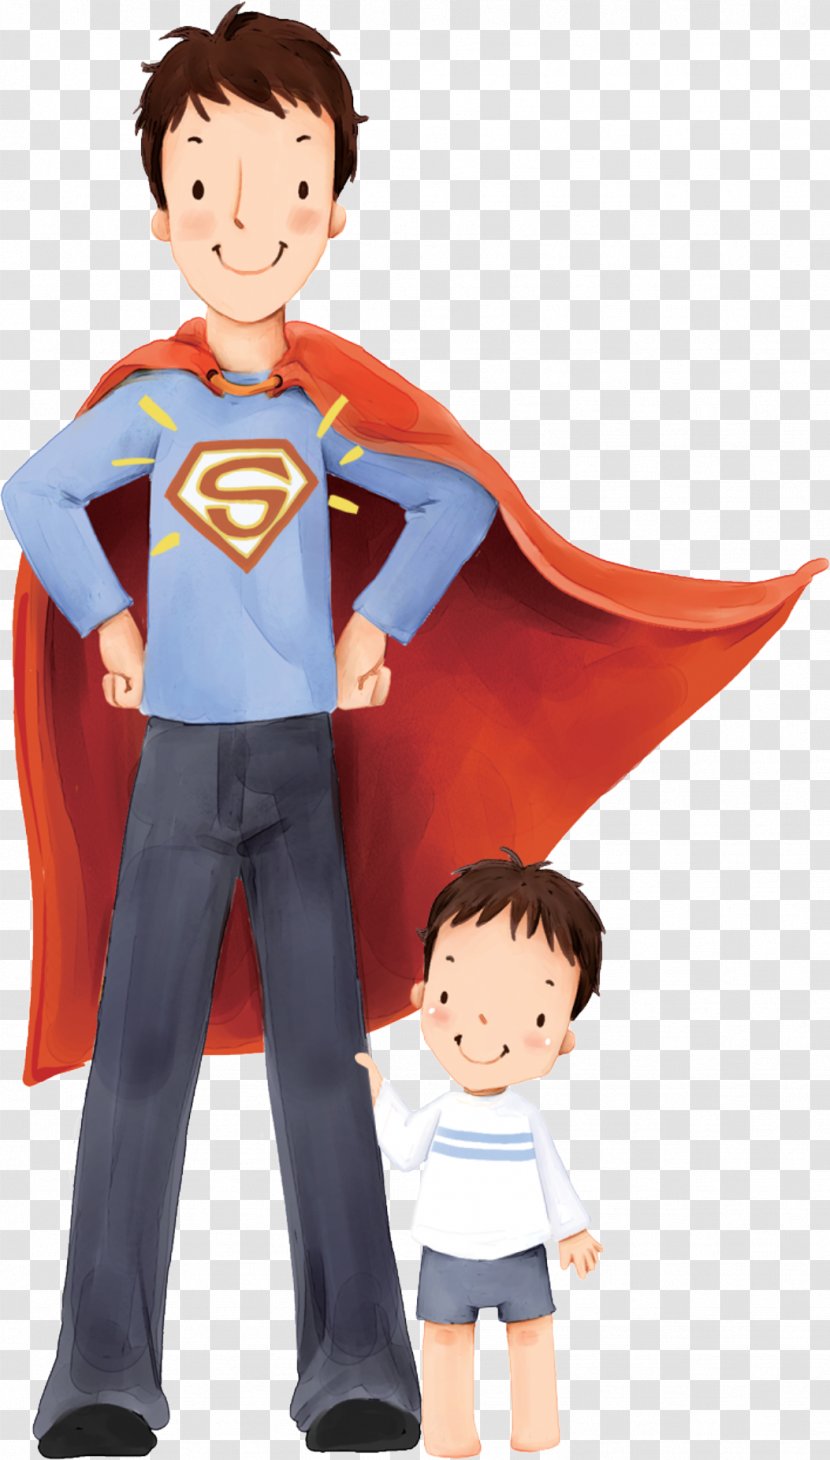 Clark Kent Father Illustration - Clothing - Wearing A Superman Outfit Men Transparent PNG